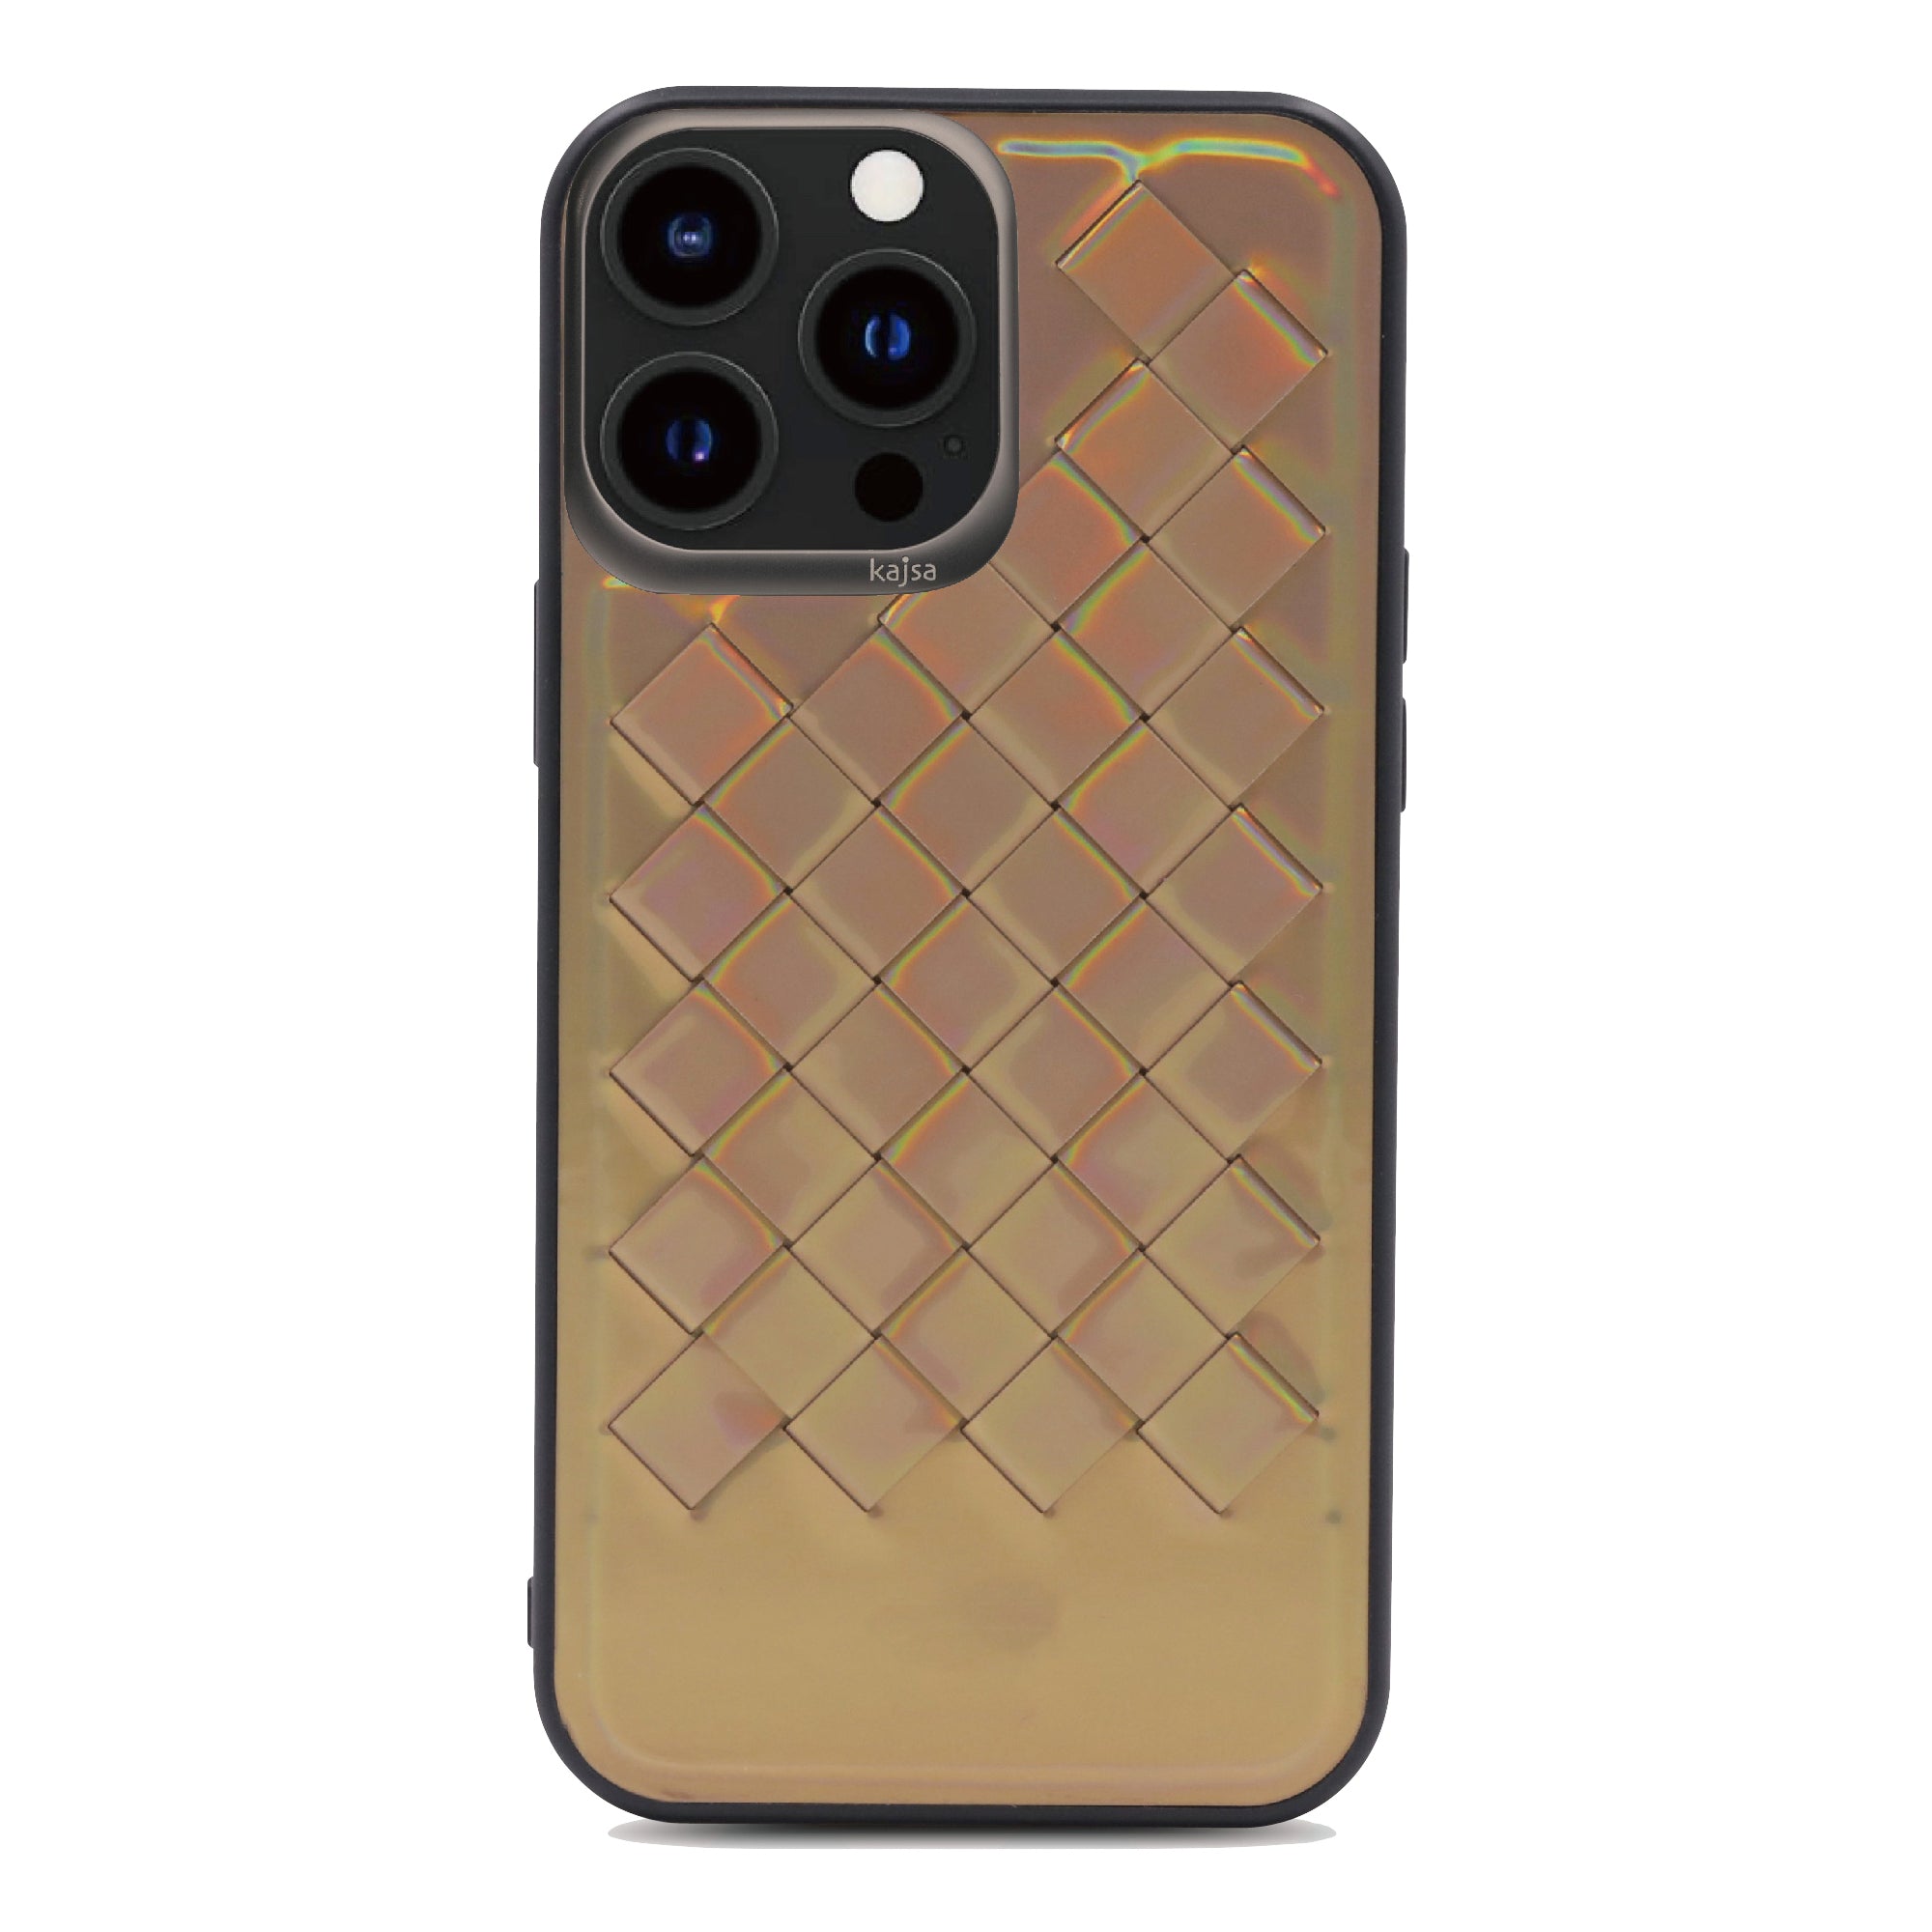 Preppie Collection - Sunshine Woven Back Case for iPhone 13-Phone Case- phone case - phone cases- phone cover- iphone cover- iphone case- iphone cases- leather case- leather cases- DIYCASE - custom case - leather cover - hand strap case - croco pattern case - snake pattern case - carbon fiber phone case - phone case brand - unique phone case - high quality - phone case brand - protective case - buy phone case hong kong - online buy phone case - iphone‎手機殼 - 客製化手機殼 - samsung ‎手機殼 - 香港手機殼 - 買電話殼